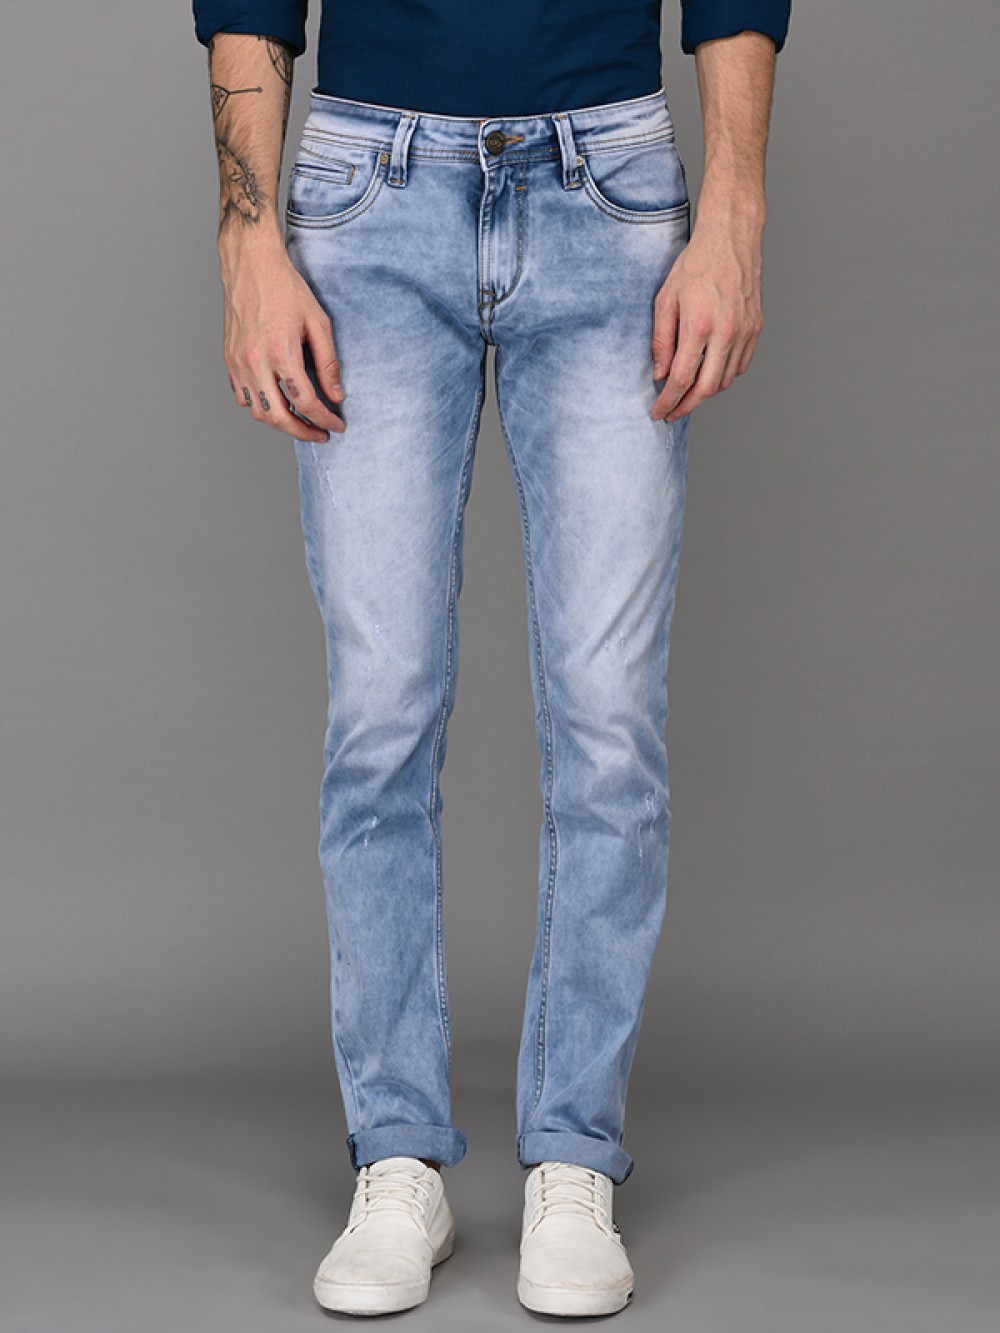 Why to choose a custom jeans. | Tailored Jeans's BLOG